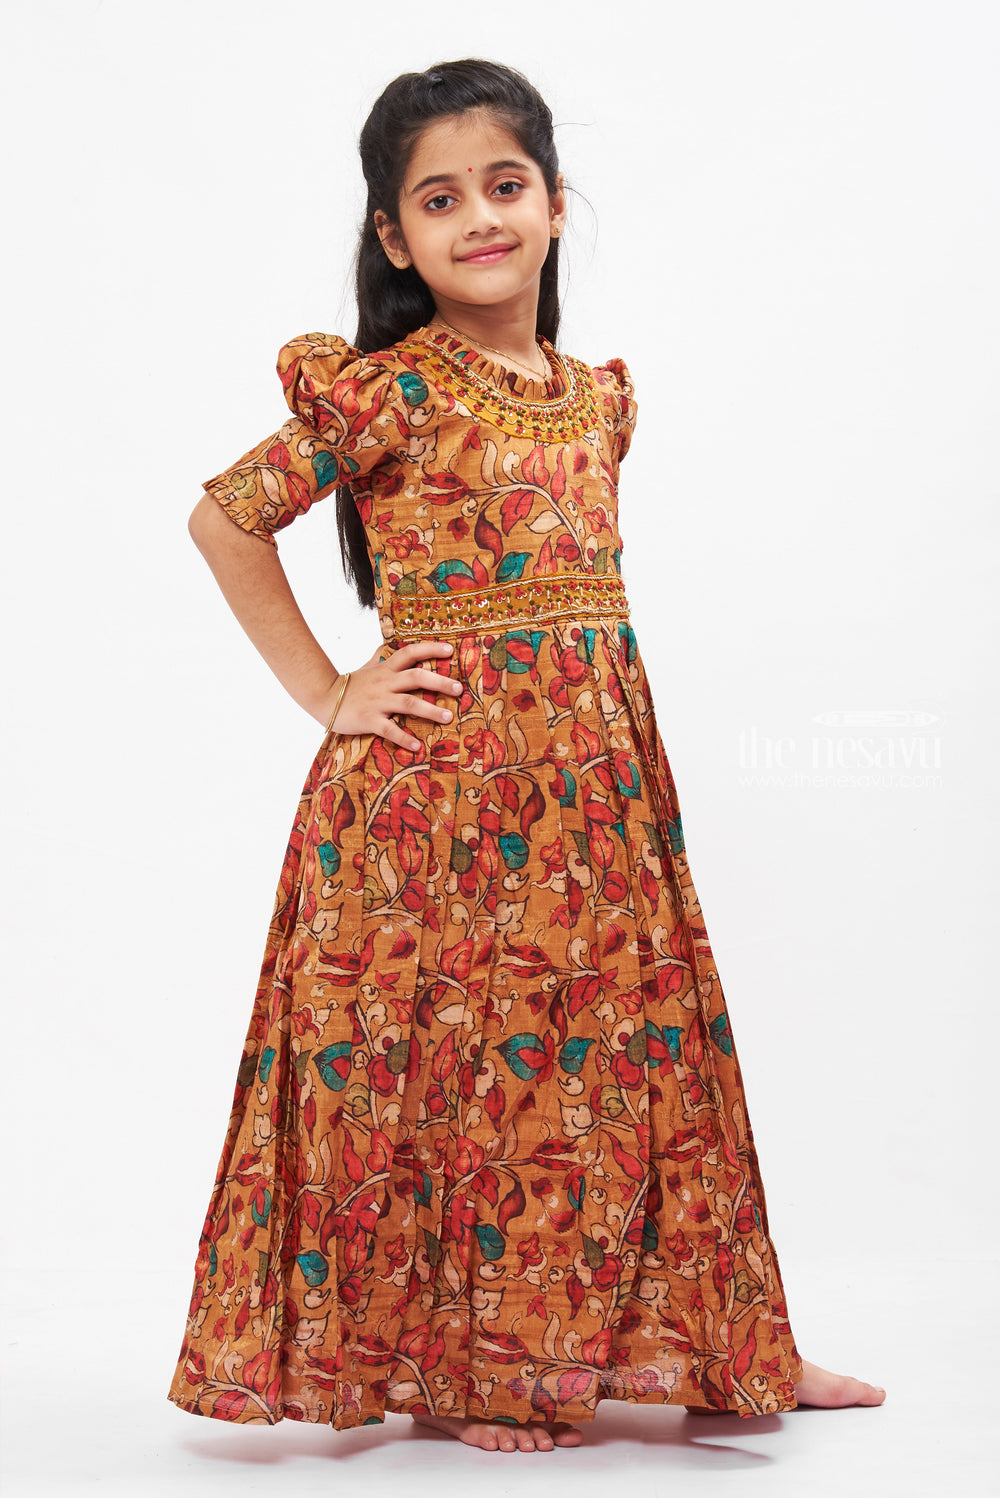 The Nesavu Girls Silk Gown Cultural Splendor Embellished Anarkali Gown for Girls- Traditional Festive Attire Nesavu Girls Beaded Floral Anarkali Dress | Elegant Ethnic Gown for Special Occasions | The Nesavu